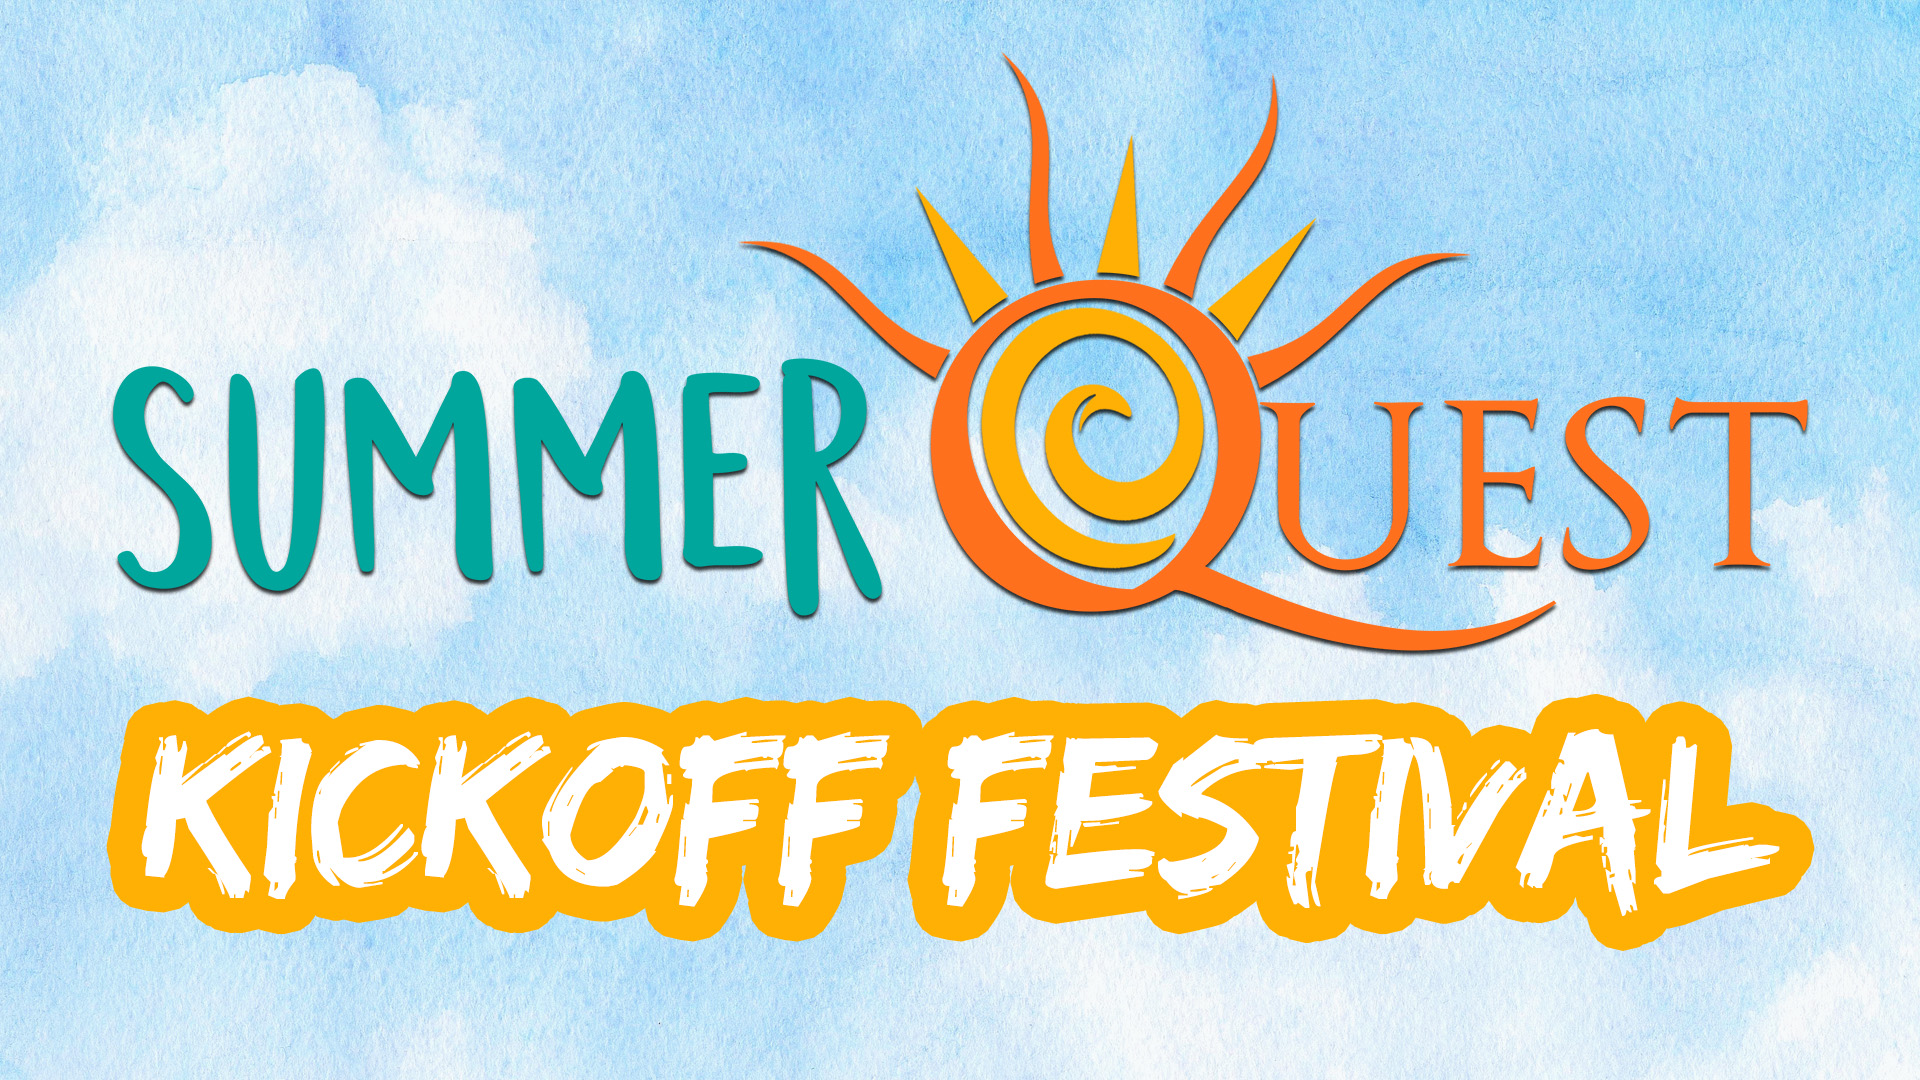 Text reads SummerQuest Kickoff Festival, with a sunburst design in representing the letter Q. A watercolor blue sy serves as the background.